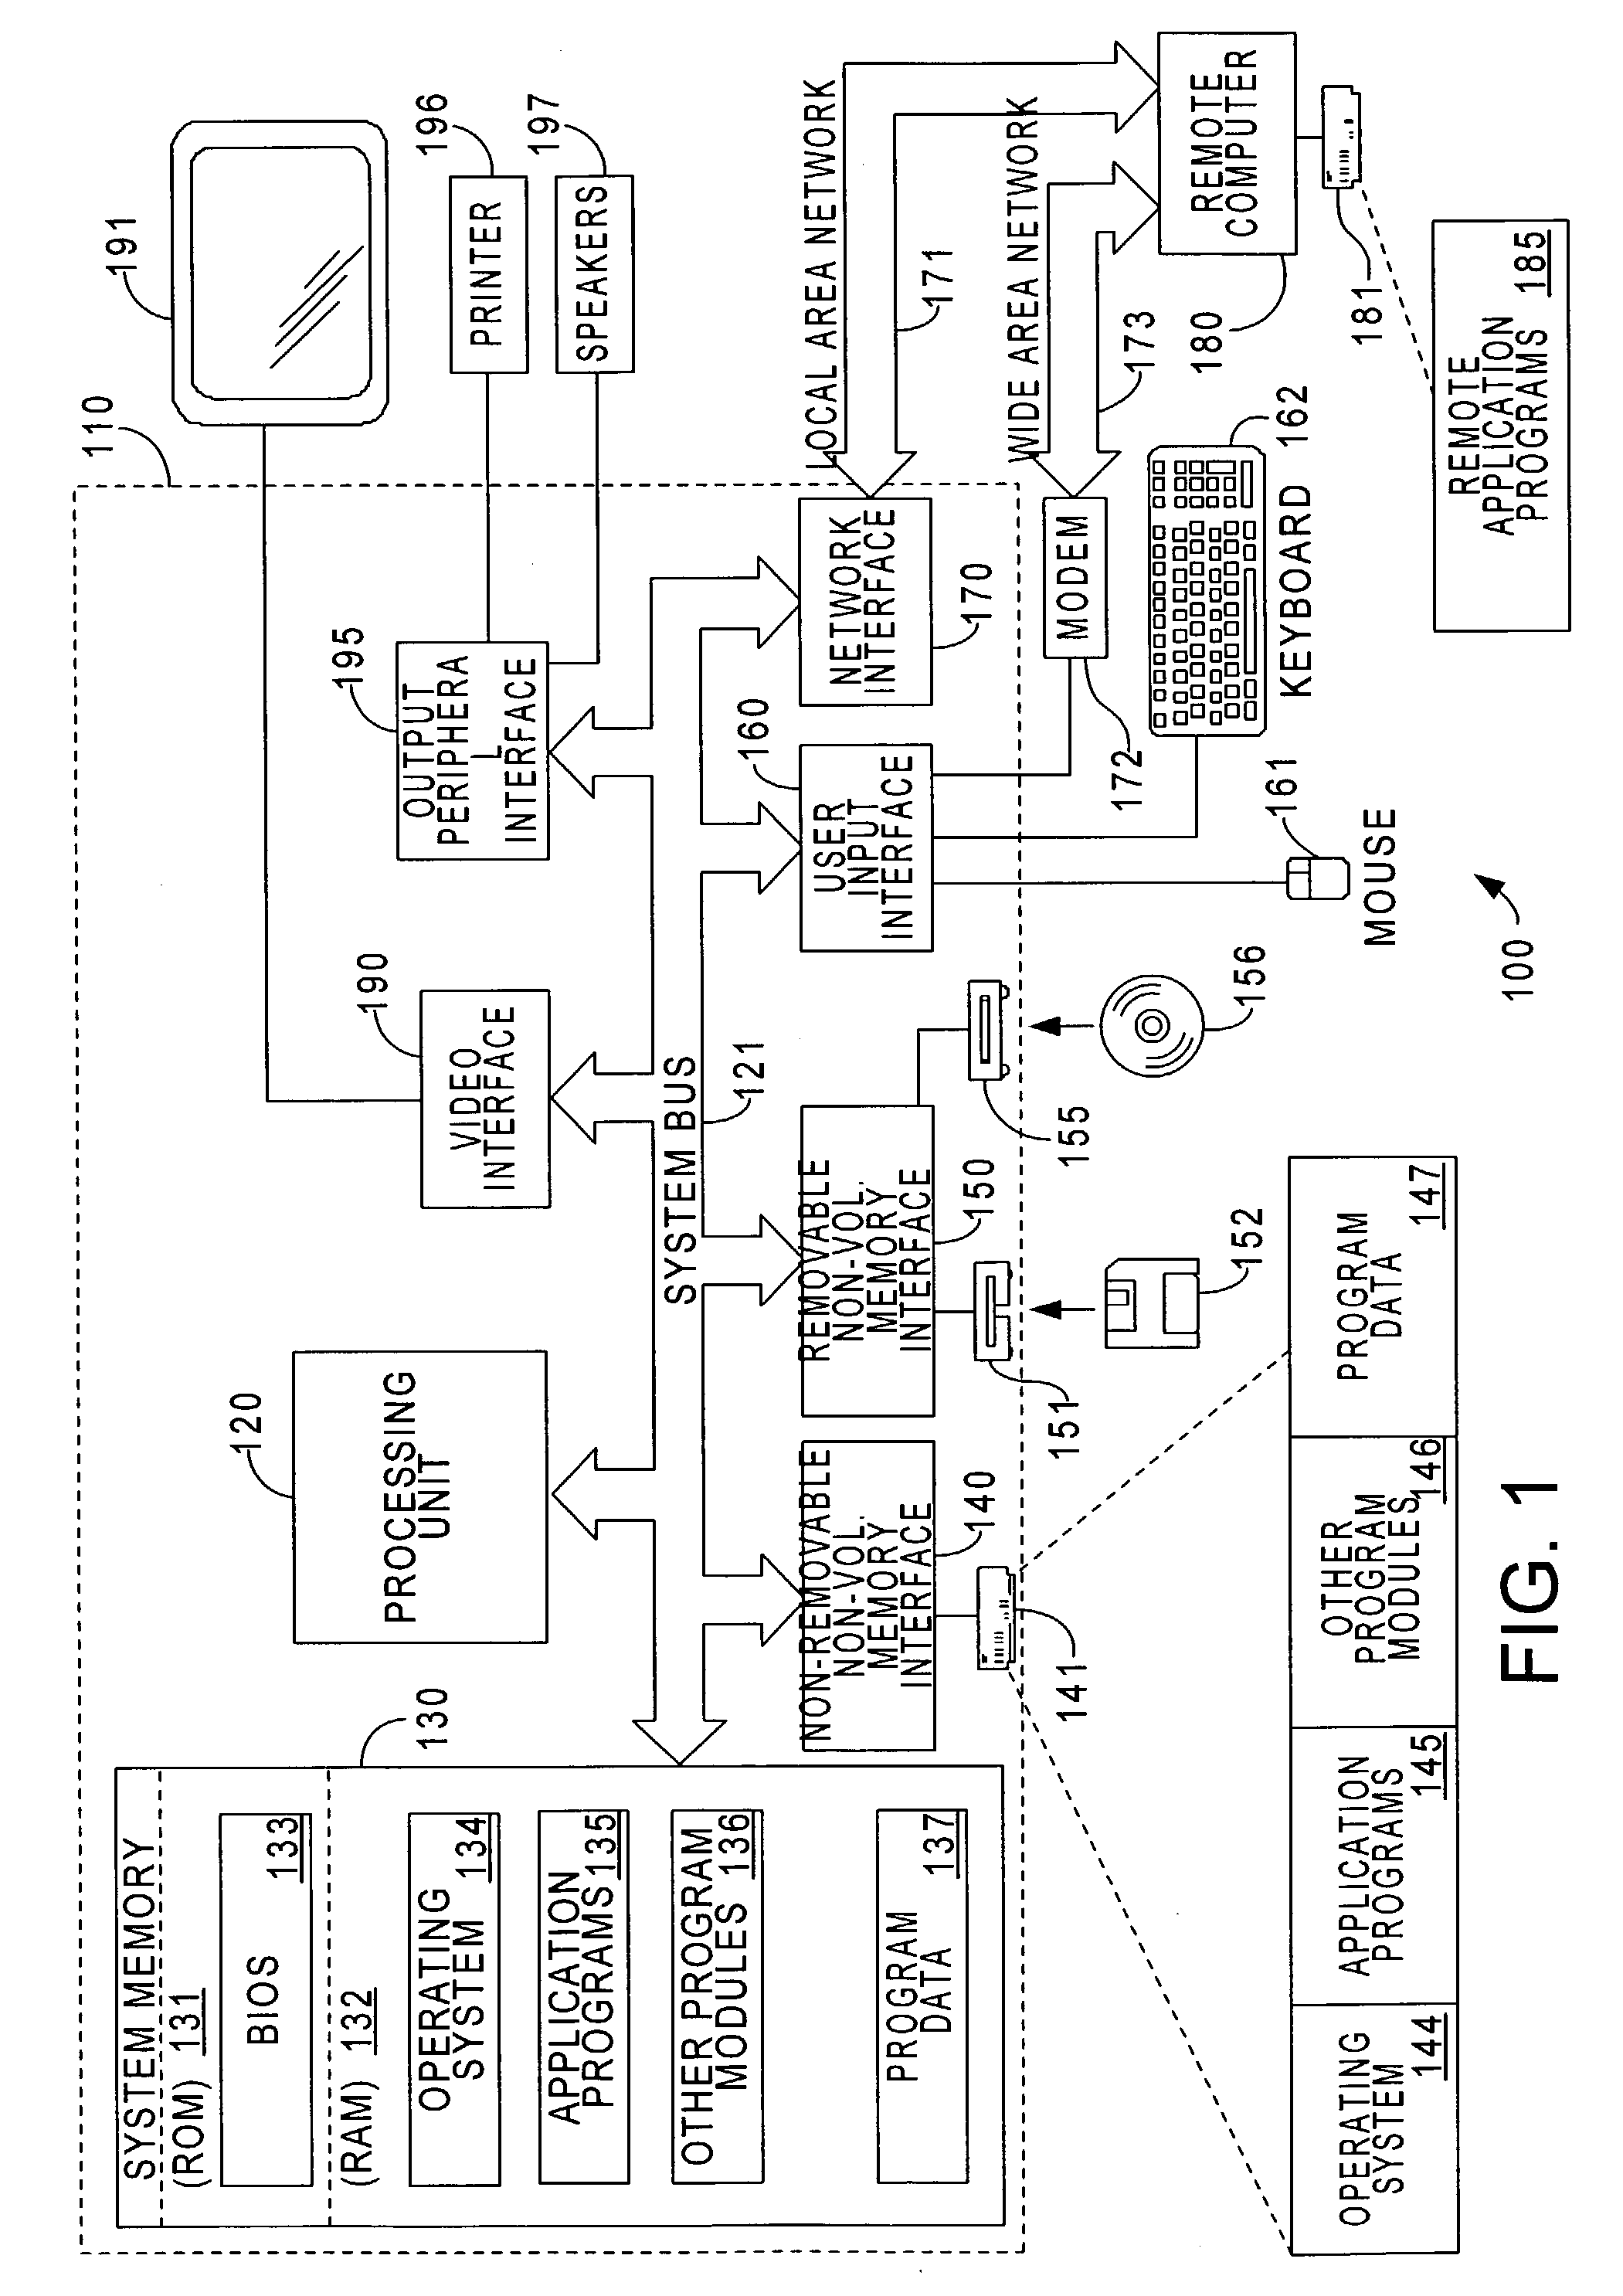 Method and apparatus to reduce power consumption and improve read/write performance of hard disk drives using non-volatile memory